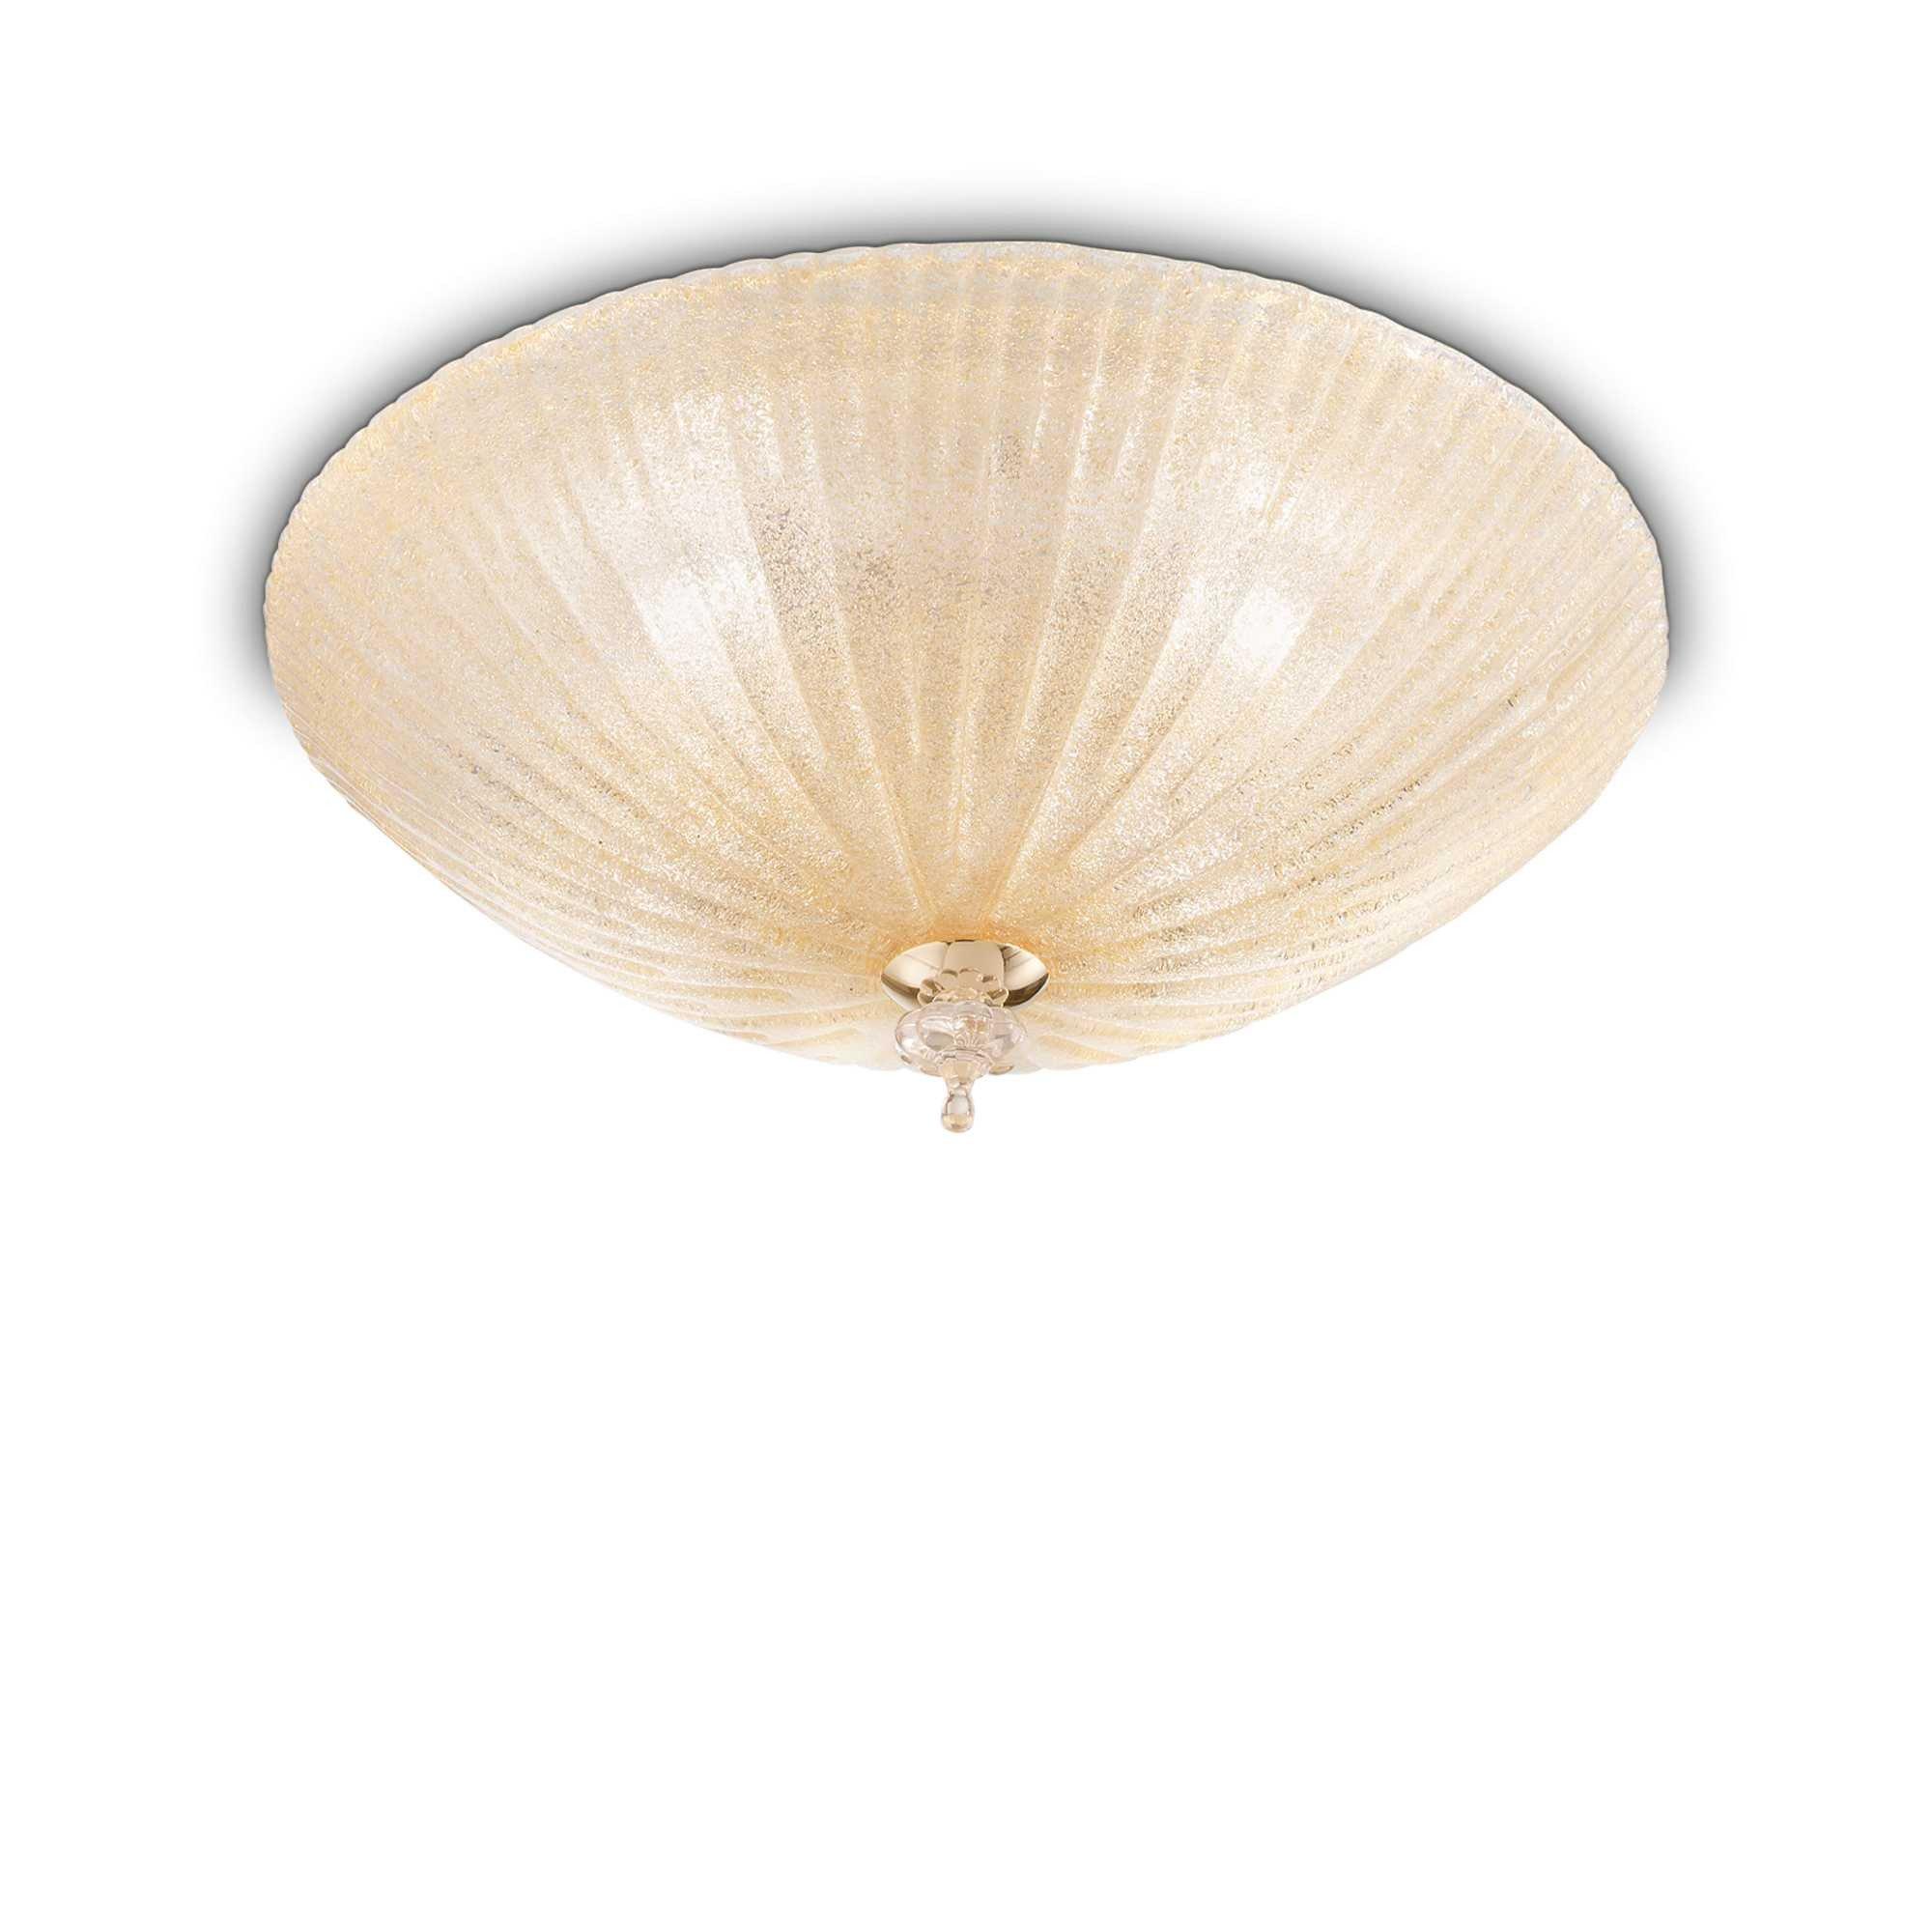 Shell 6 Light Indoor Wall Ceiling Light Gold with Amber Glass E27